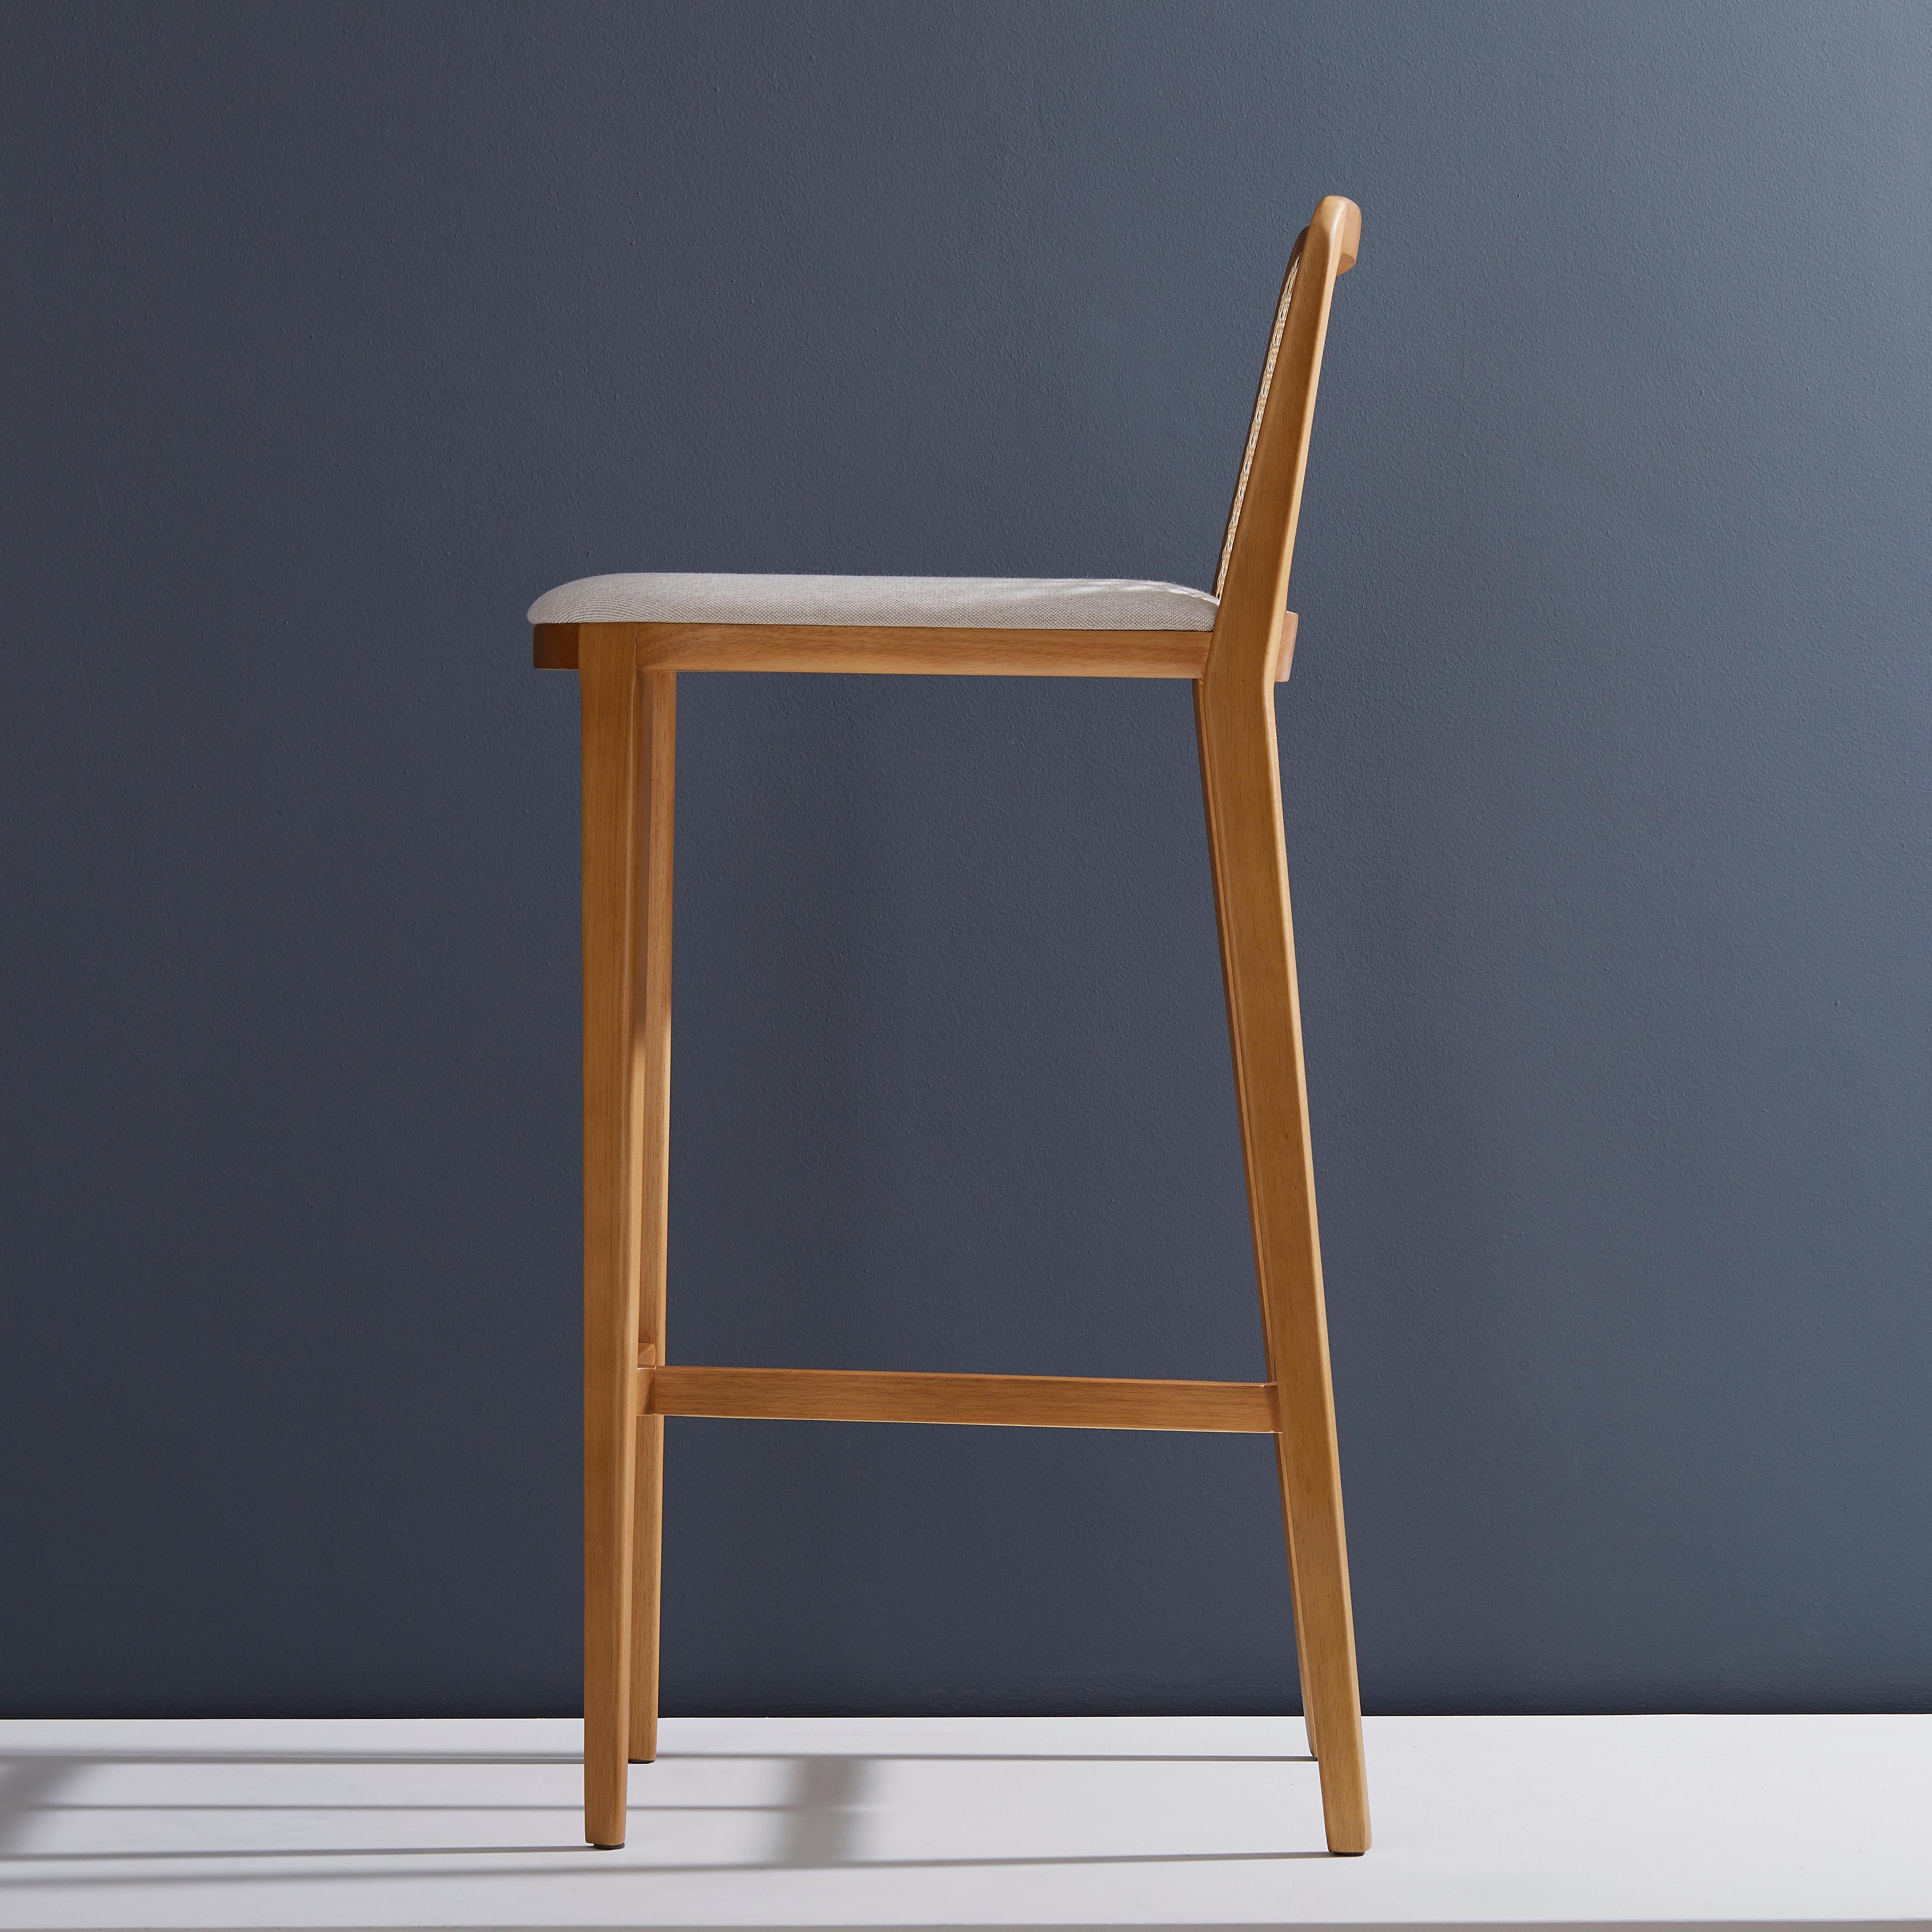 Minimal Style, Solid Wood Stool, Textiles or Leather Seatings, Caning Backboard For Sale 2